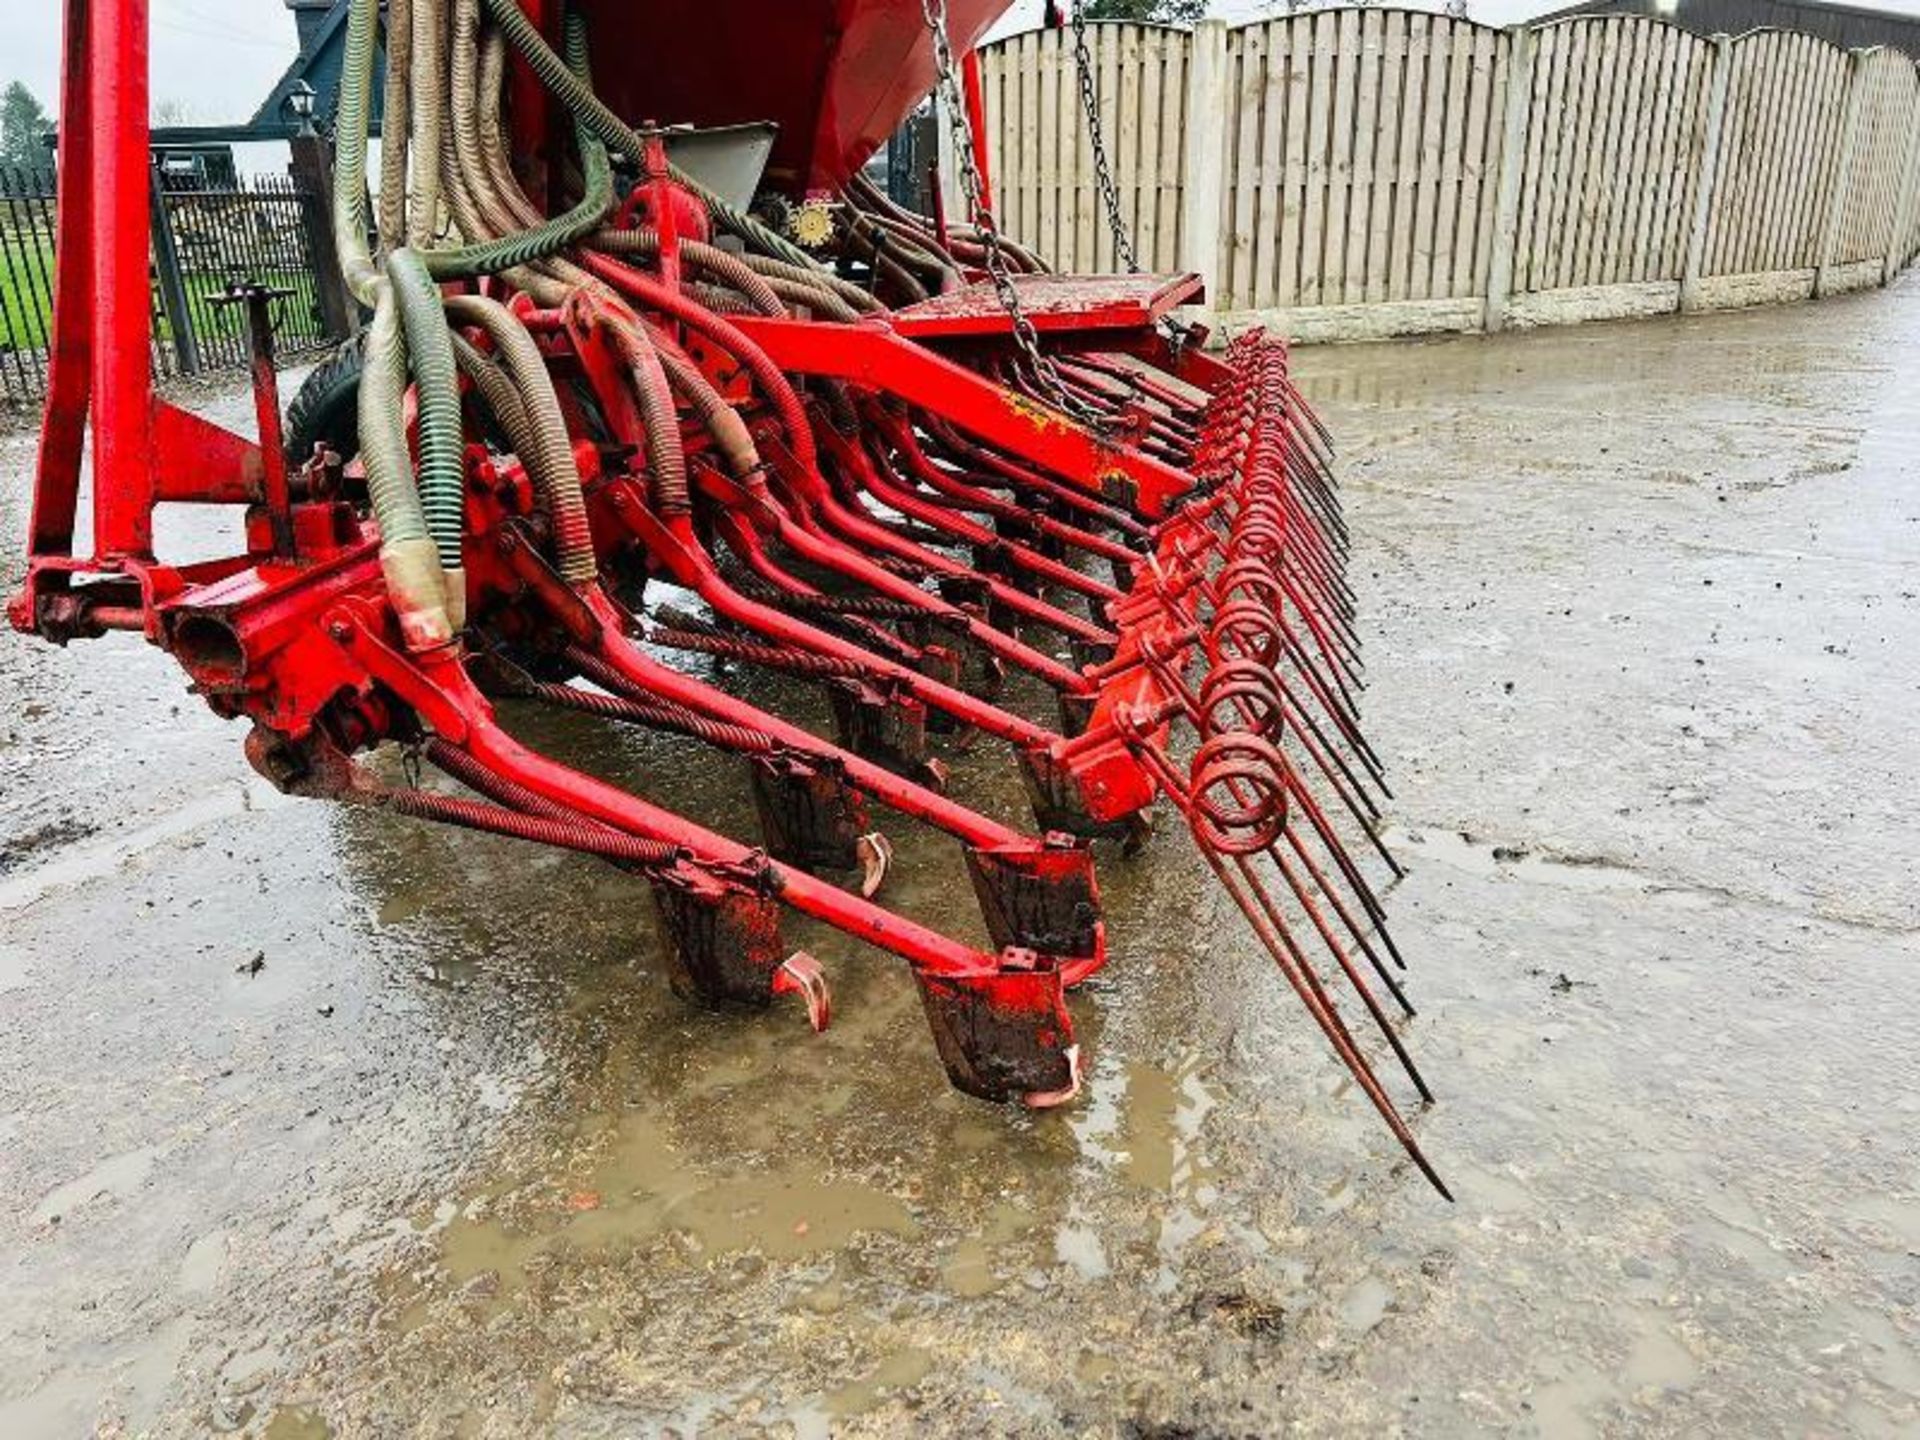 ACCORD TYPE D SEED DRILL C/W EXTENDABLE ARMS - Image 5 of 10